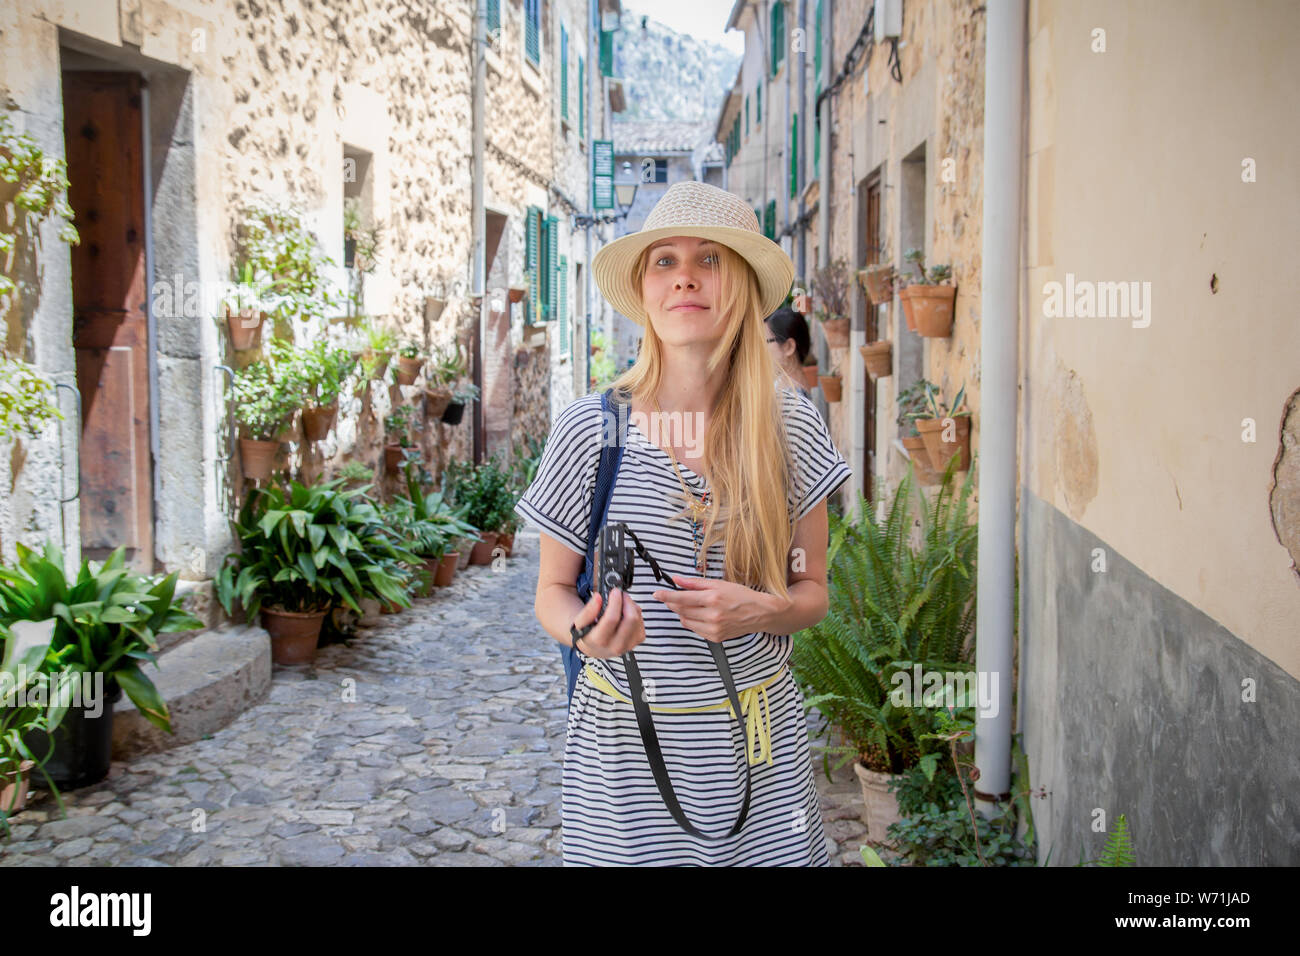 young woman tourist with camera walking down the charming street in mediterranean town in summer Stock Photo